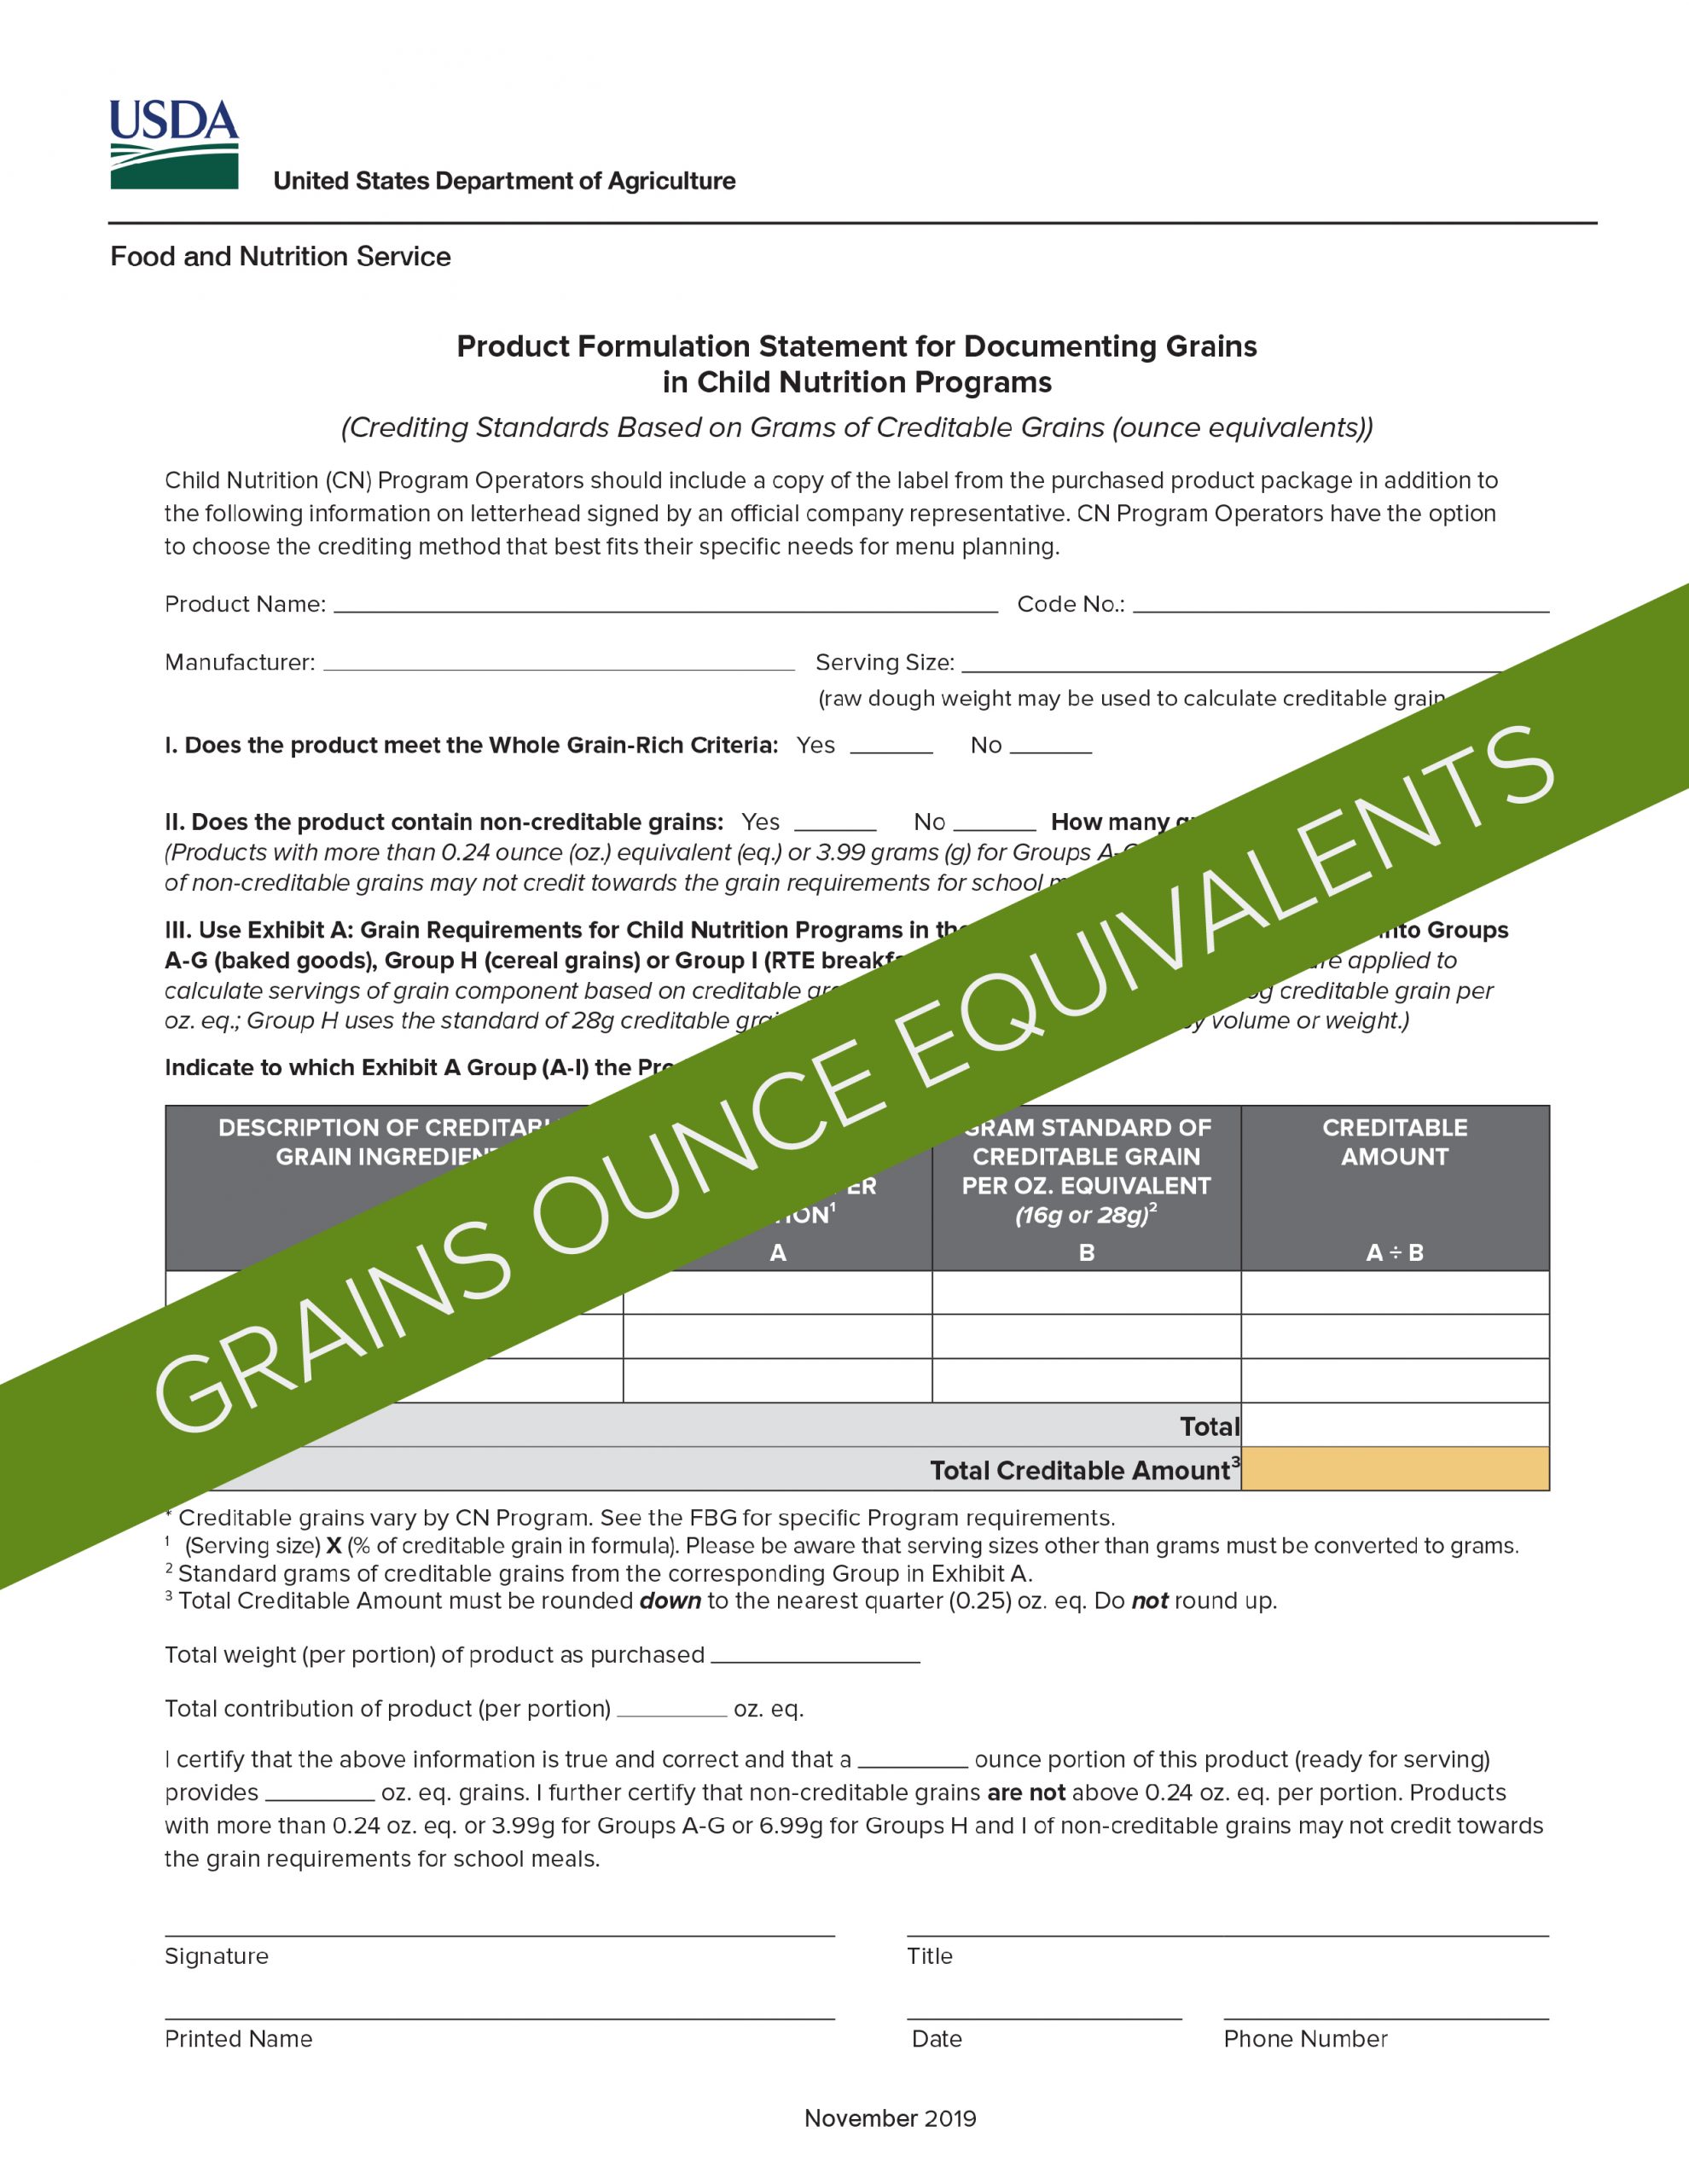 USDA Product Formulation Statement Template for Grain Ounce Equivalents